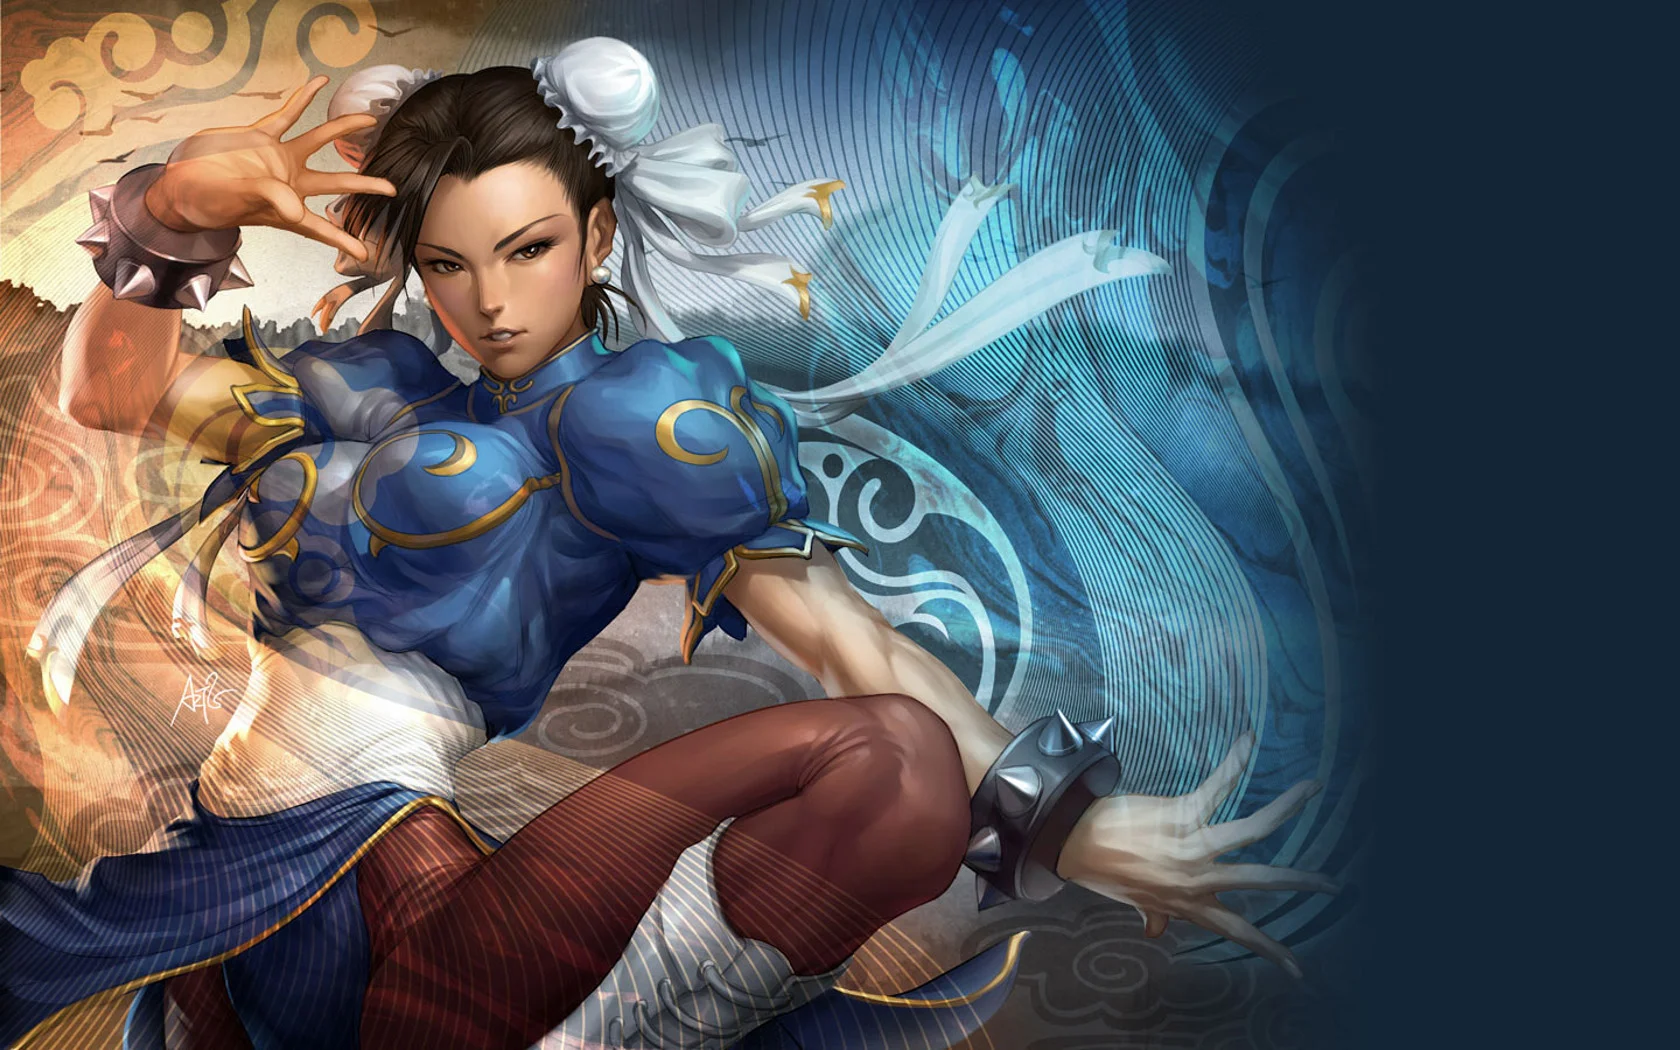 The neural network reproduced the heroine Chun Li from the Street Fighter series of fighting games